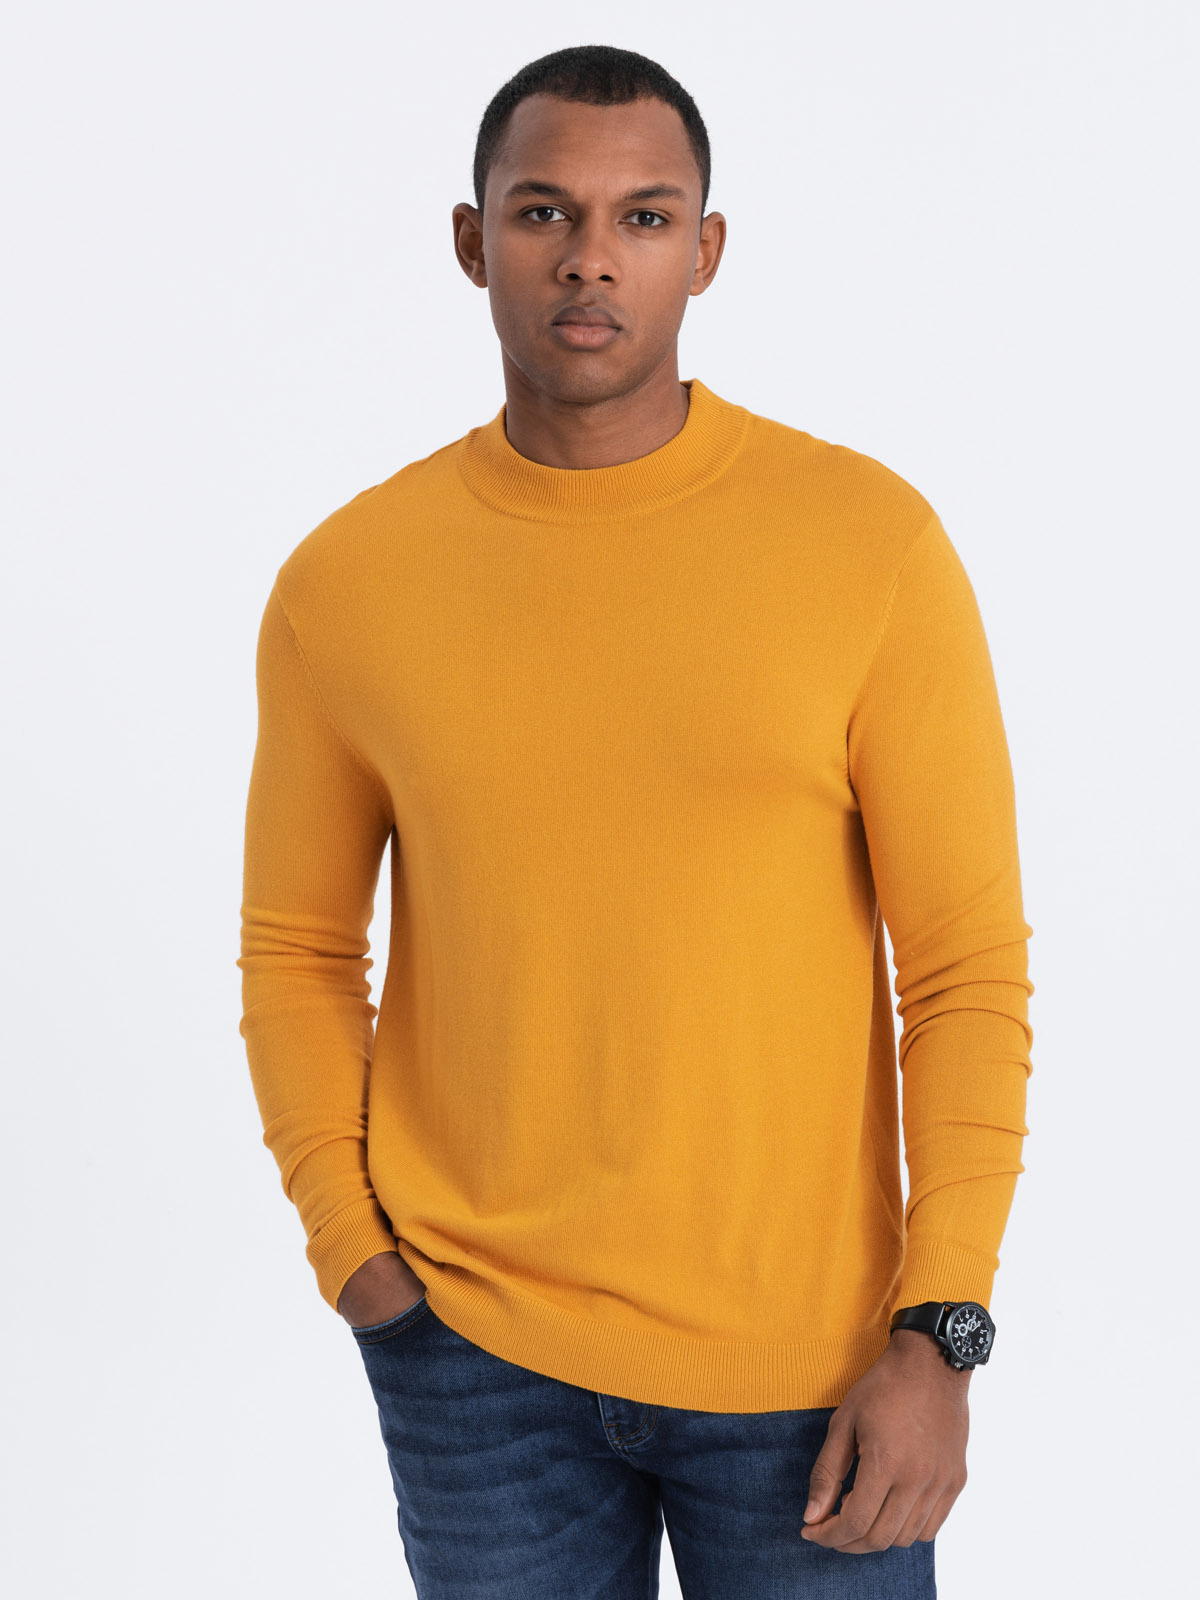 Ombre Men's knitted half turtleneck with viscose - mustard